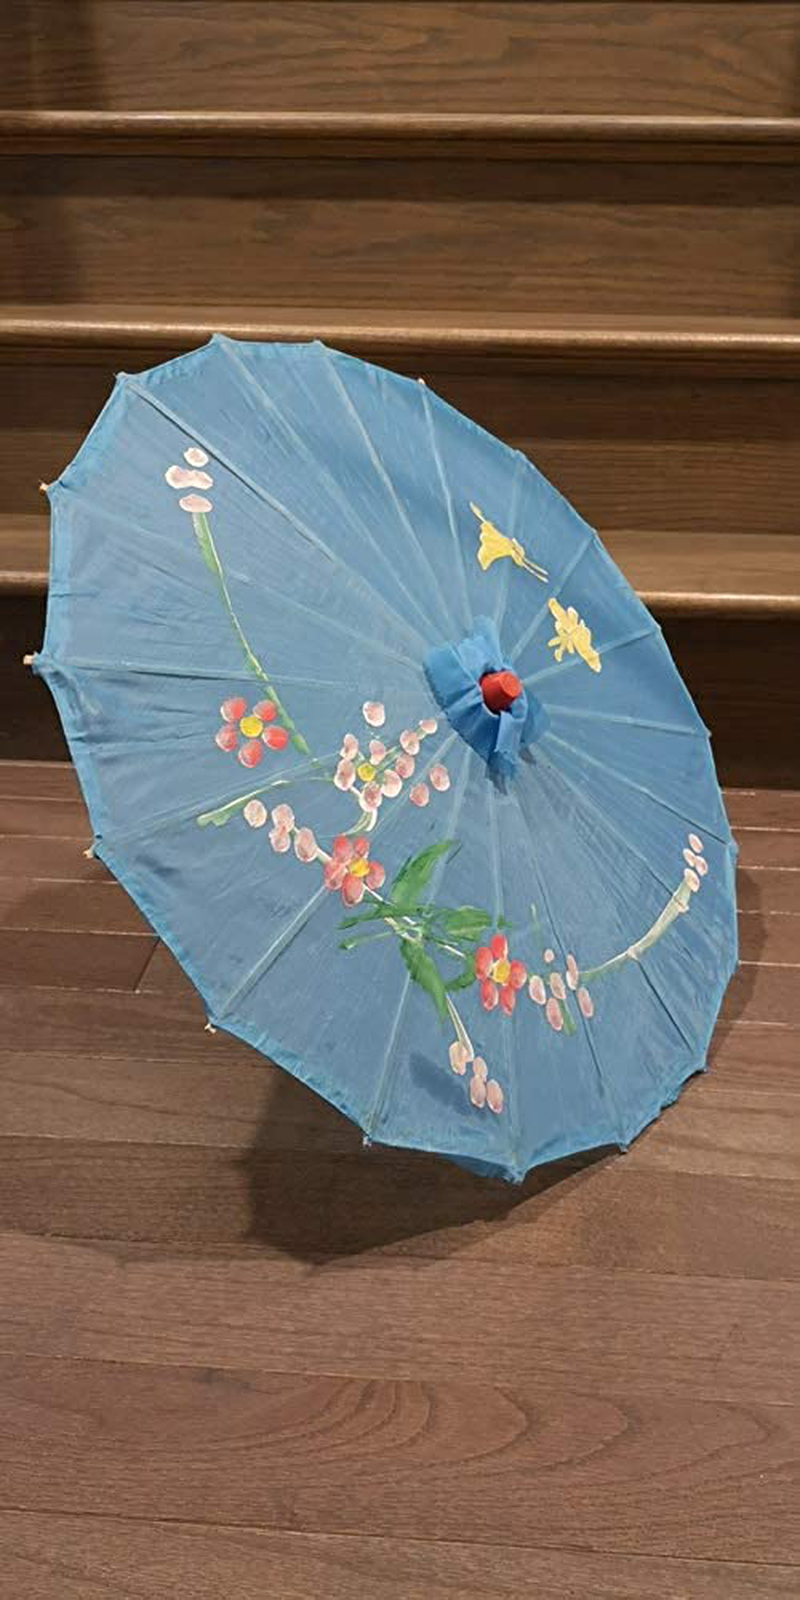 TJ GLOBAL 22" Kid's Chinese Japanese Umbrella Parasol for Wedding Parties, Photography, Costumes, Cosplay, Decoration (Light Blue)